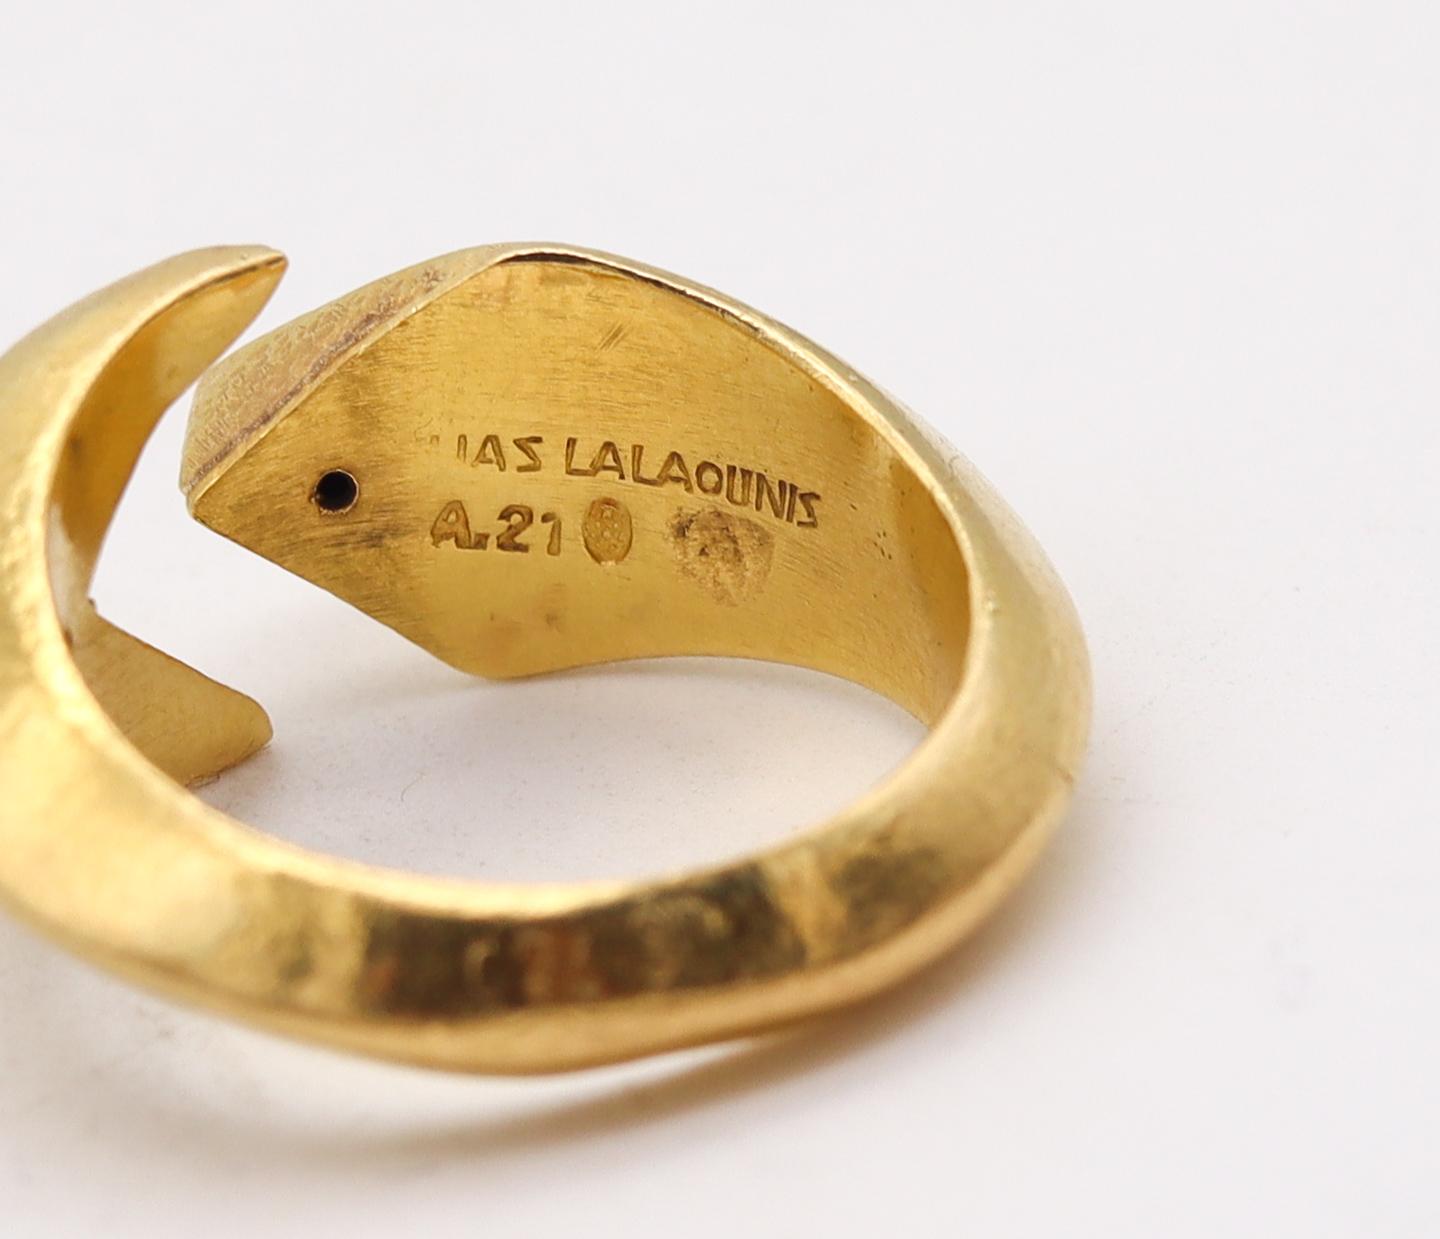 Lalaounis 1970 Geometric Open Work Paleolithic Ring in Battered 22Kt Yellow Gold 2